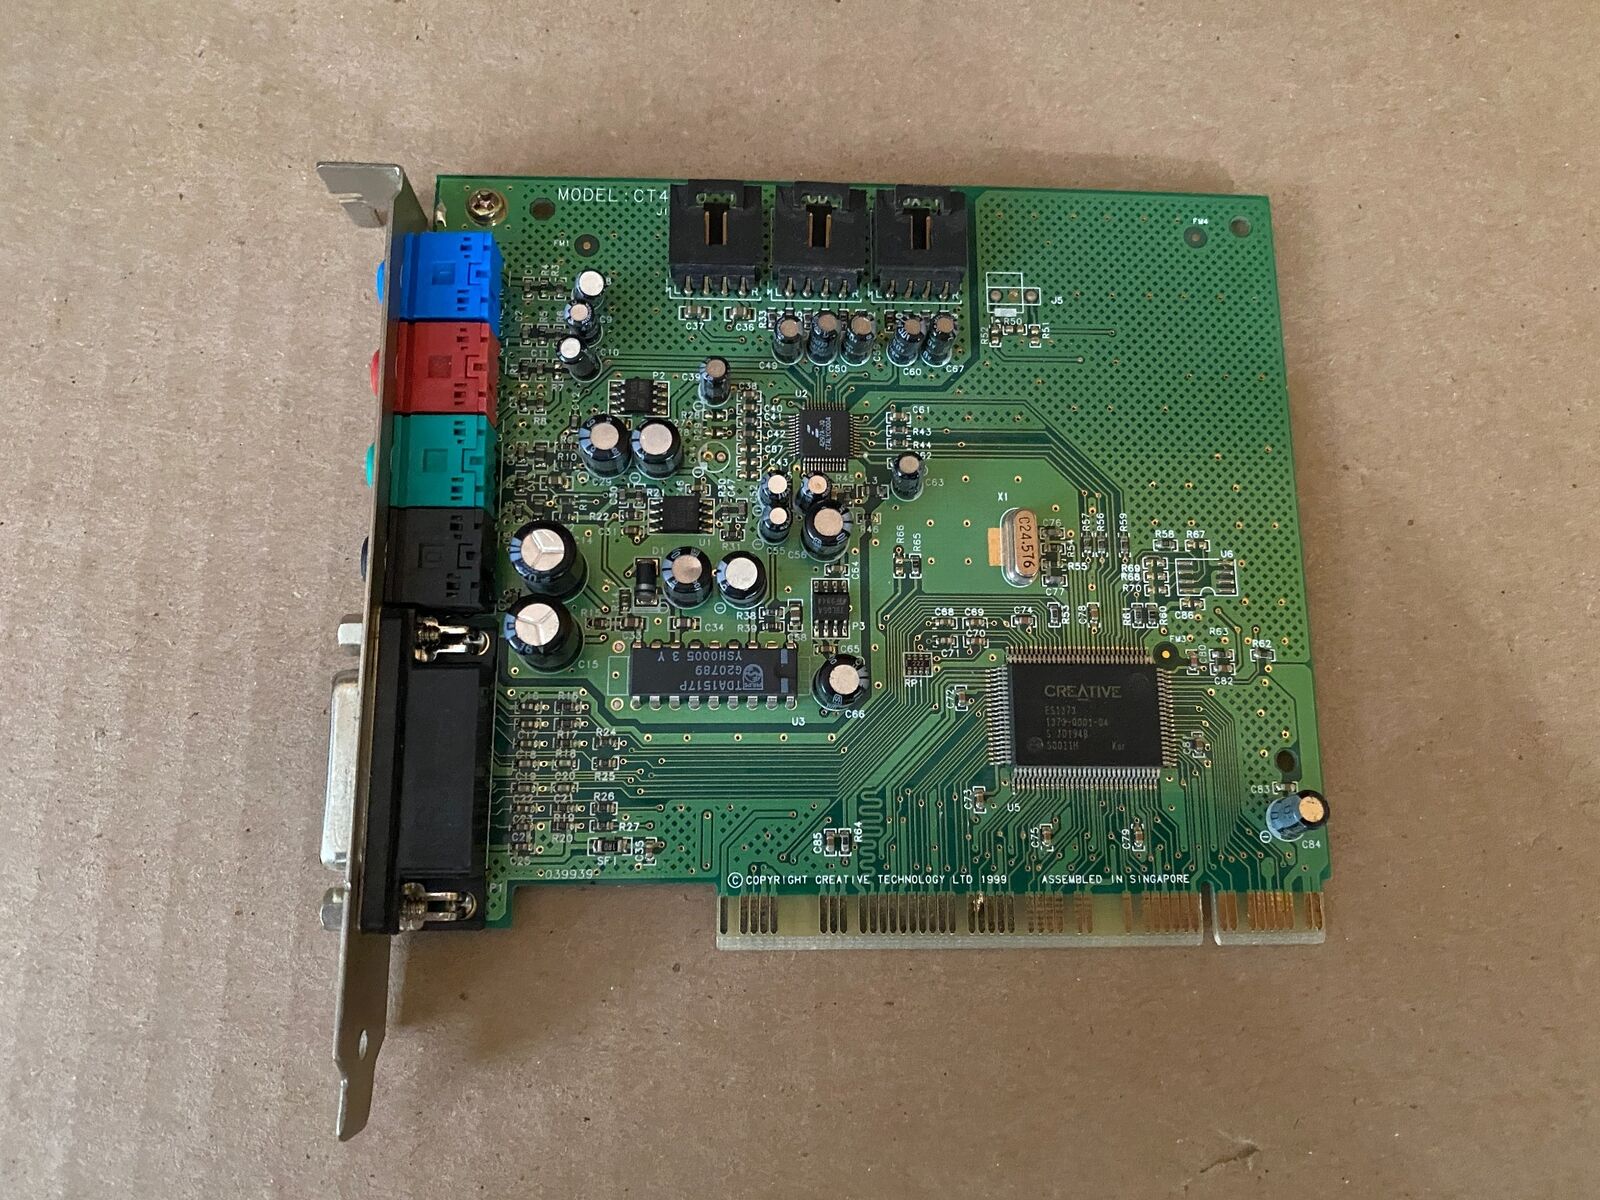 VINTAGE CREATIVE LABS PCI CT4740 SOUND CARD FOR RETRO GAMMING F7-2(4)